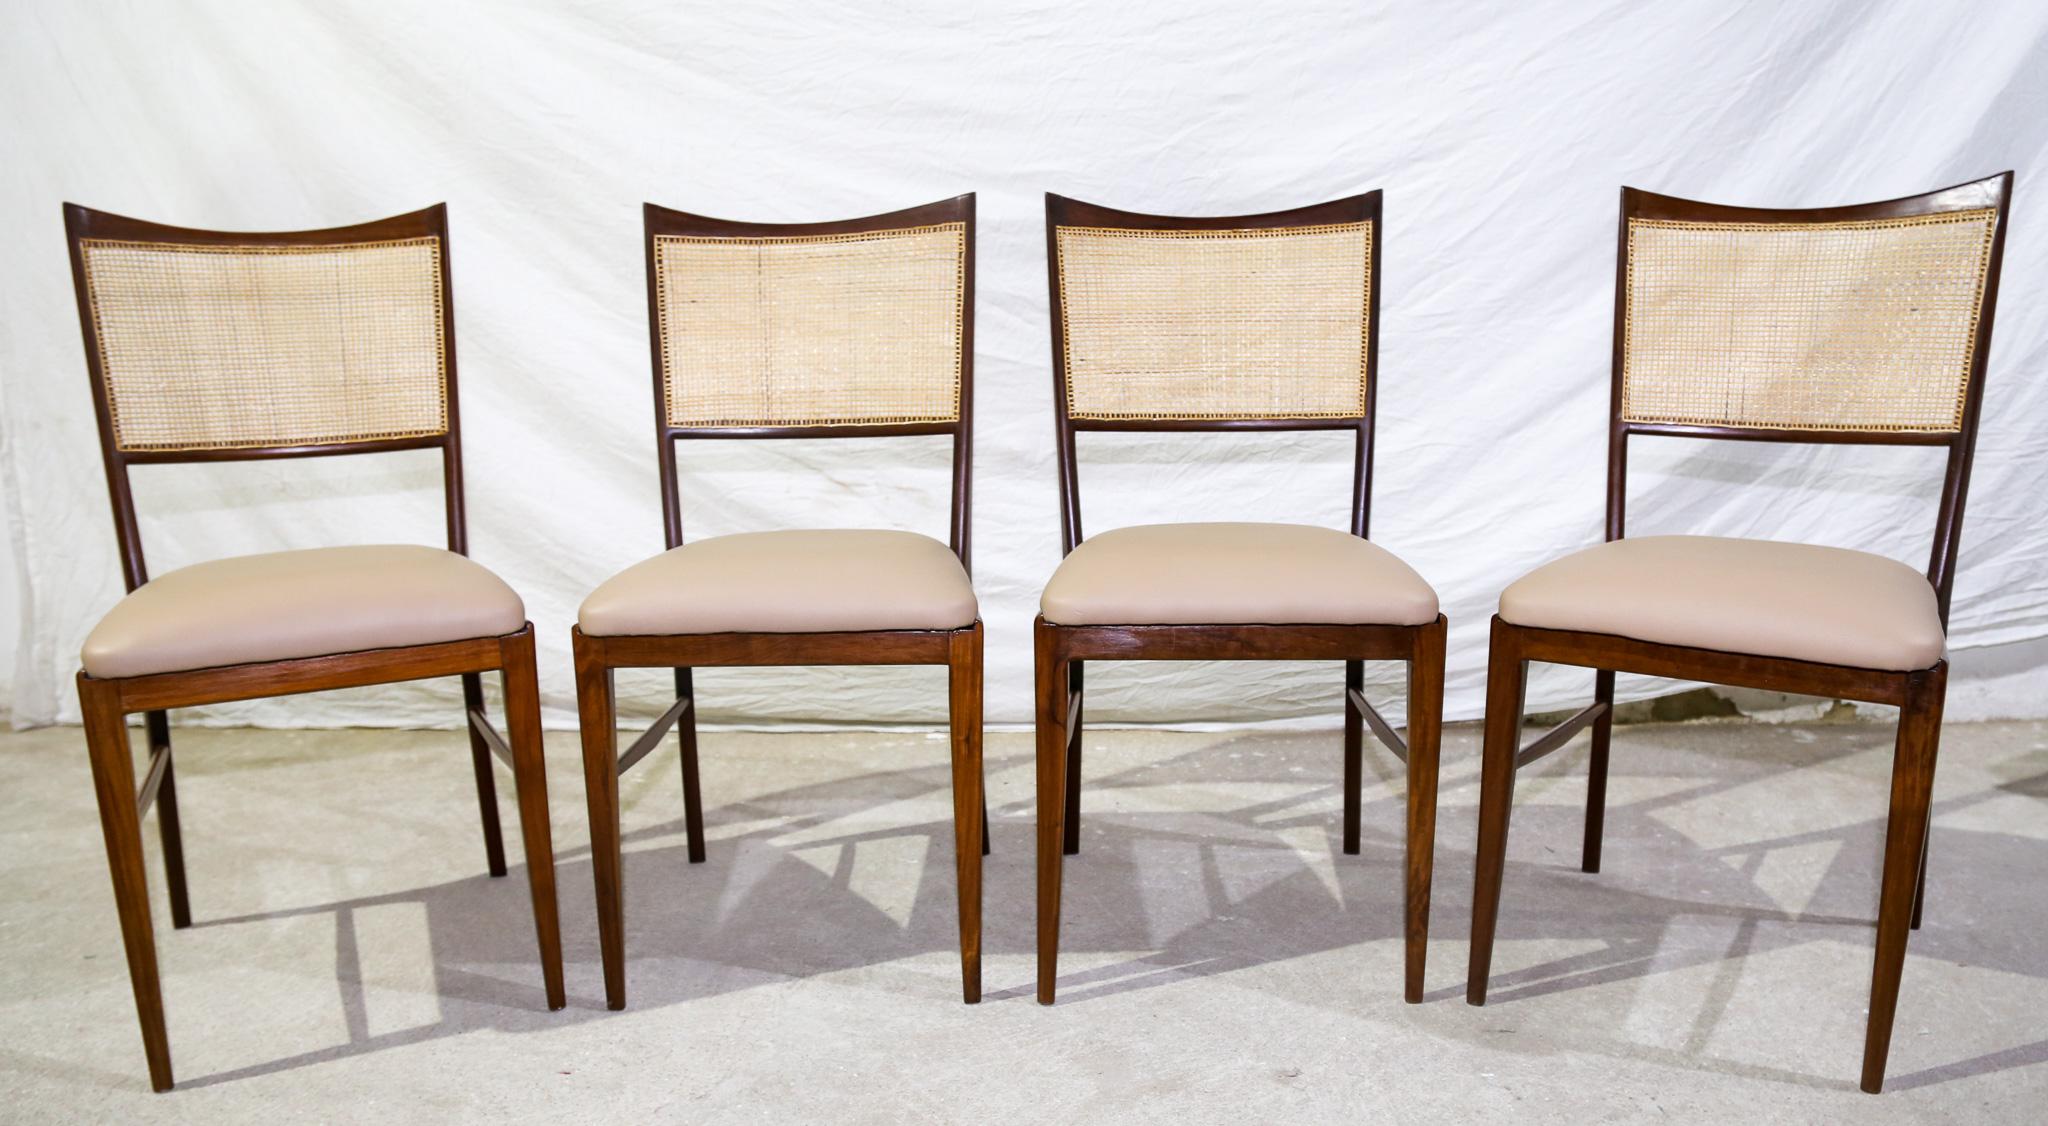 Brazilian Modern Set of Four Chairs in Hardwood & Beige Leather, Unknown, 1960s 1